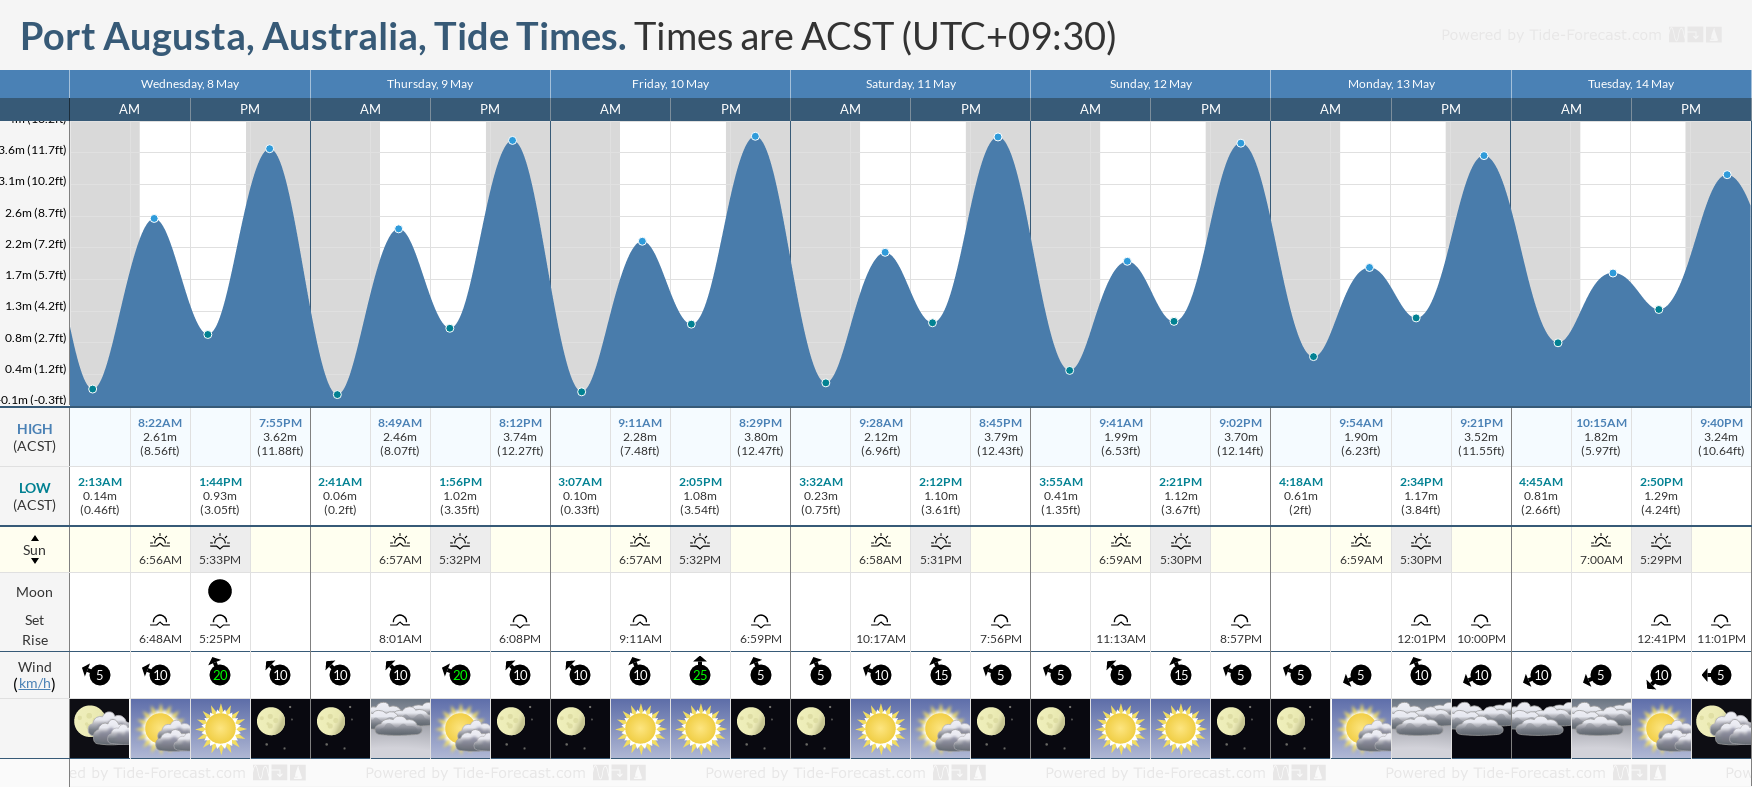 Port Augusta, Australia Tide Chart including high and low tide tide times for the next 7 days